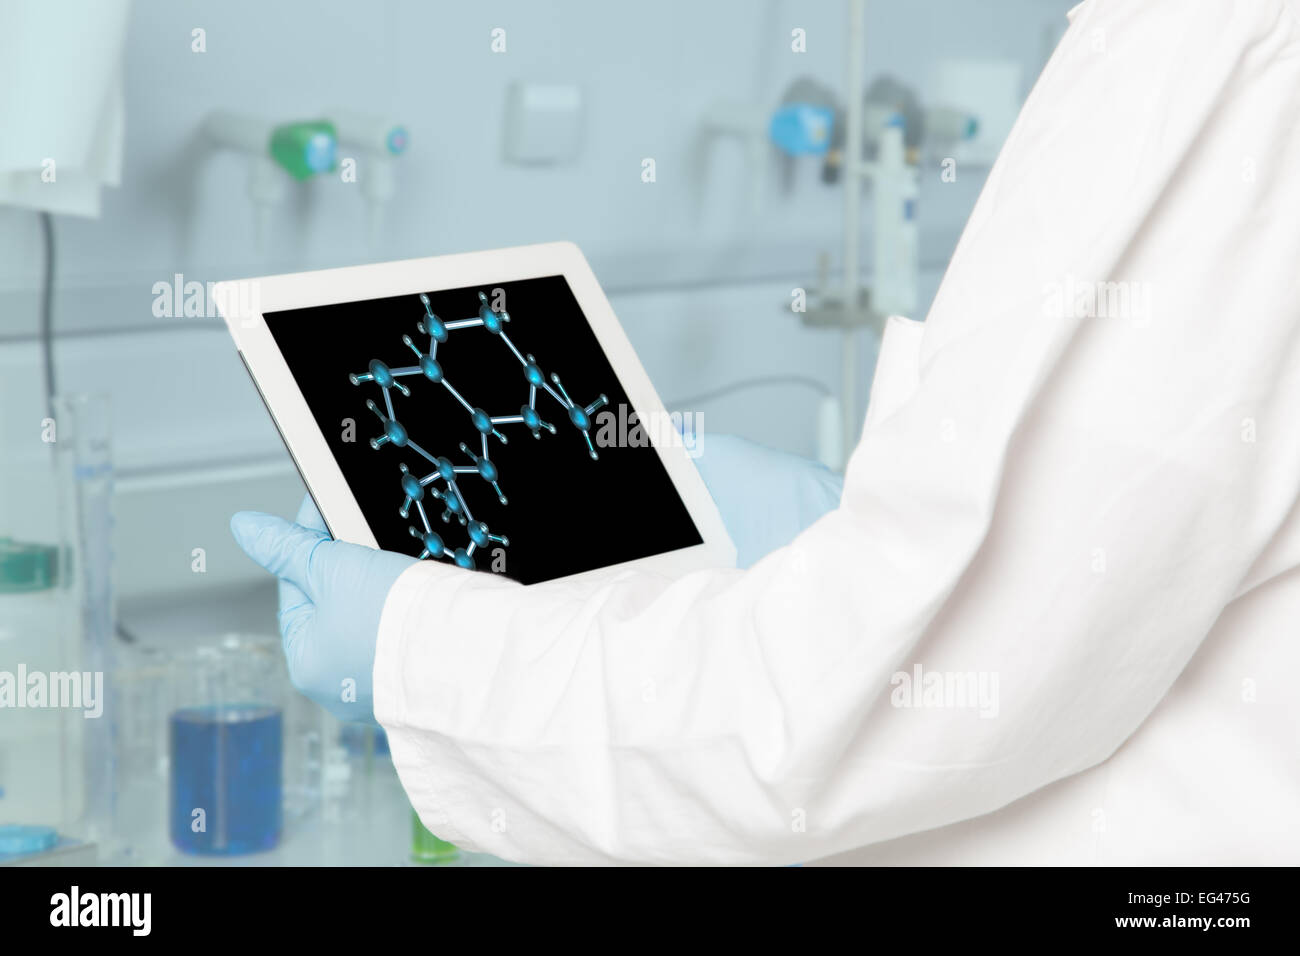 The Doctor is analysing a molecular structure on his tablet device. Stock Photo